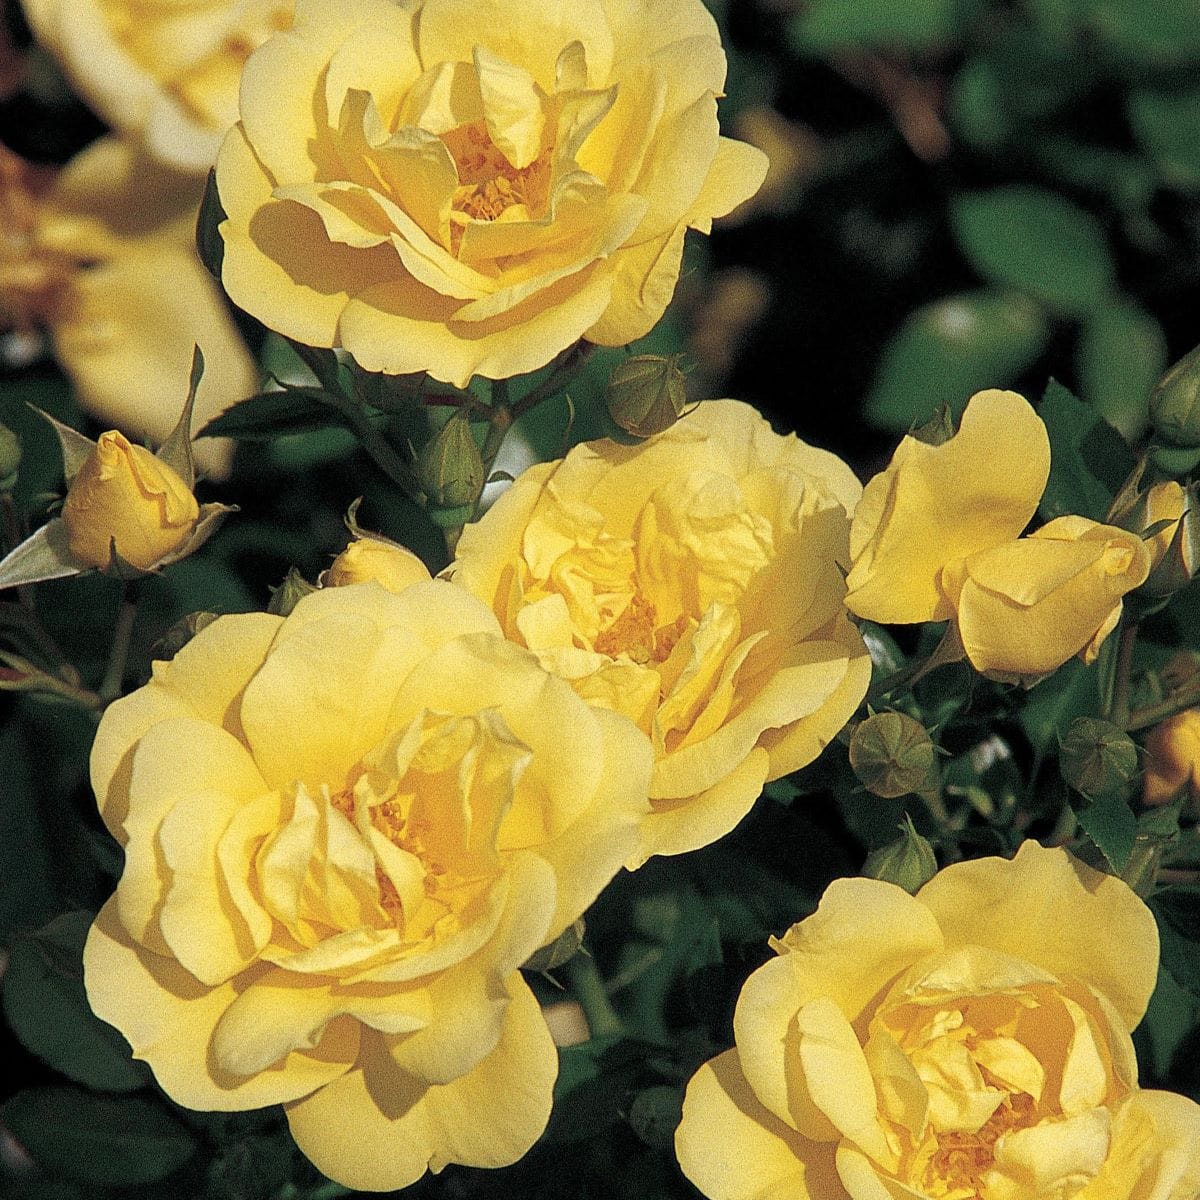 1 x bare root Rose Flower Carpet Gold (Ground Cover Rose) Plants